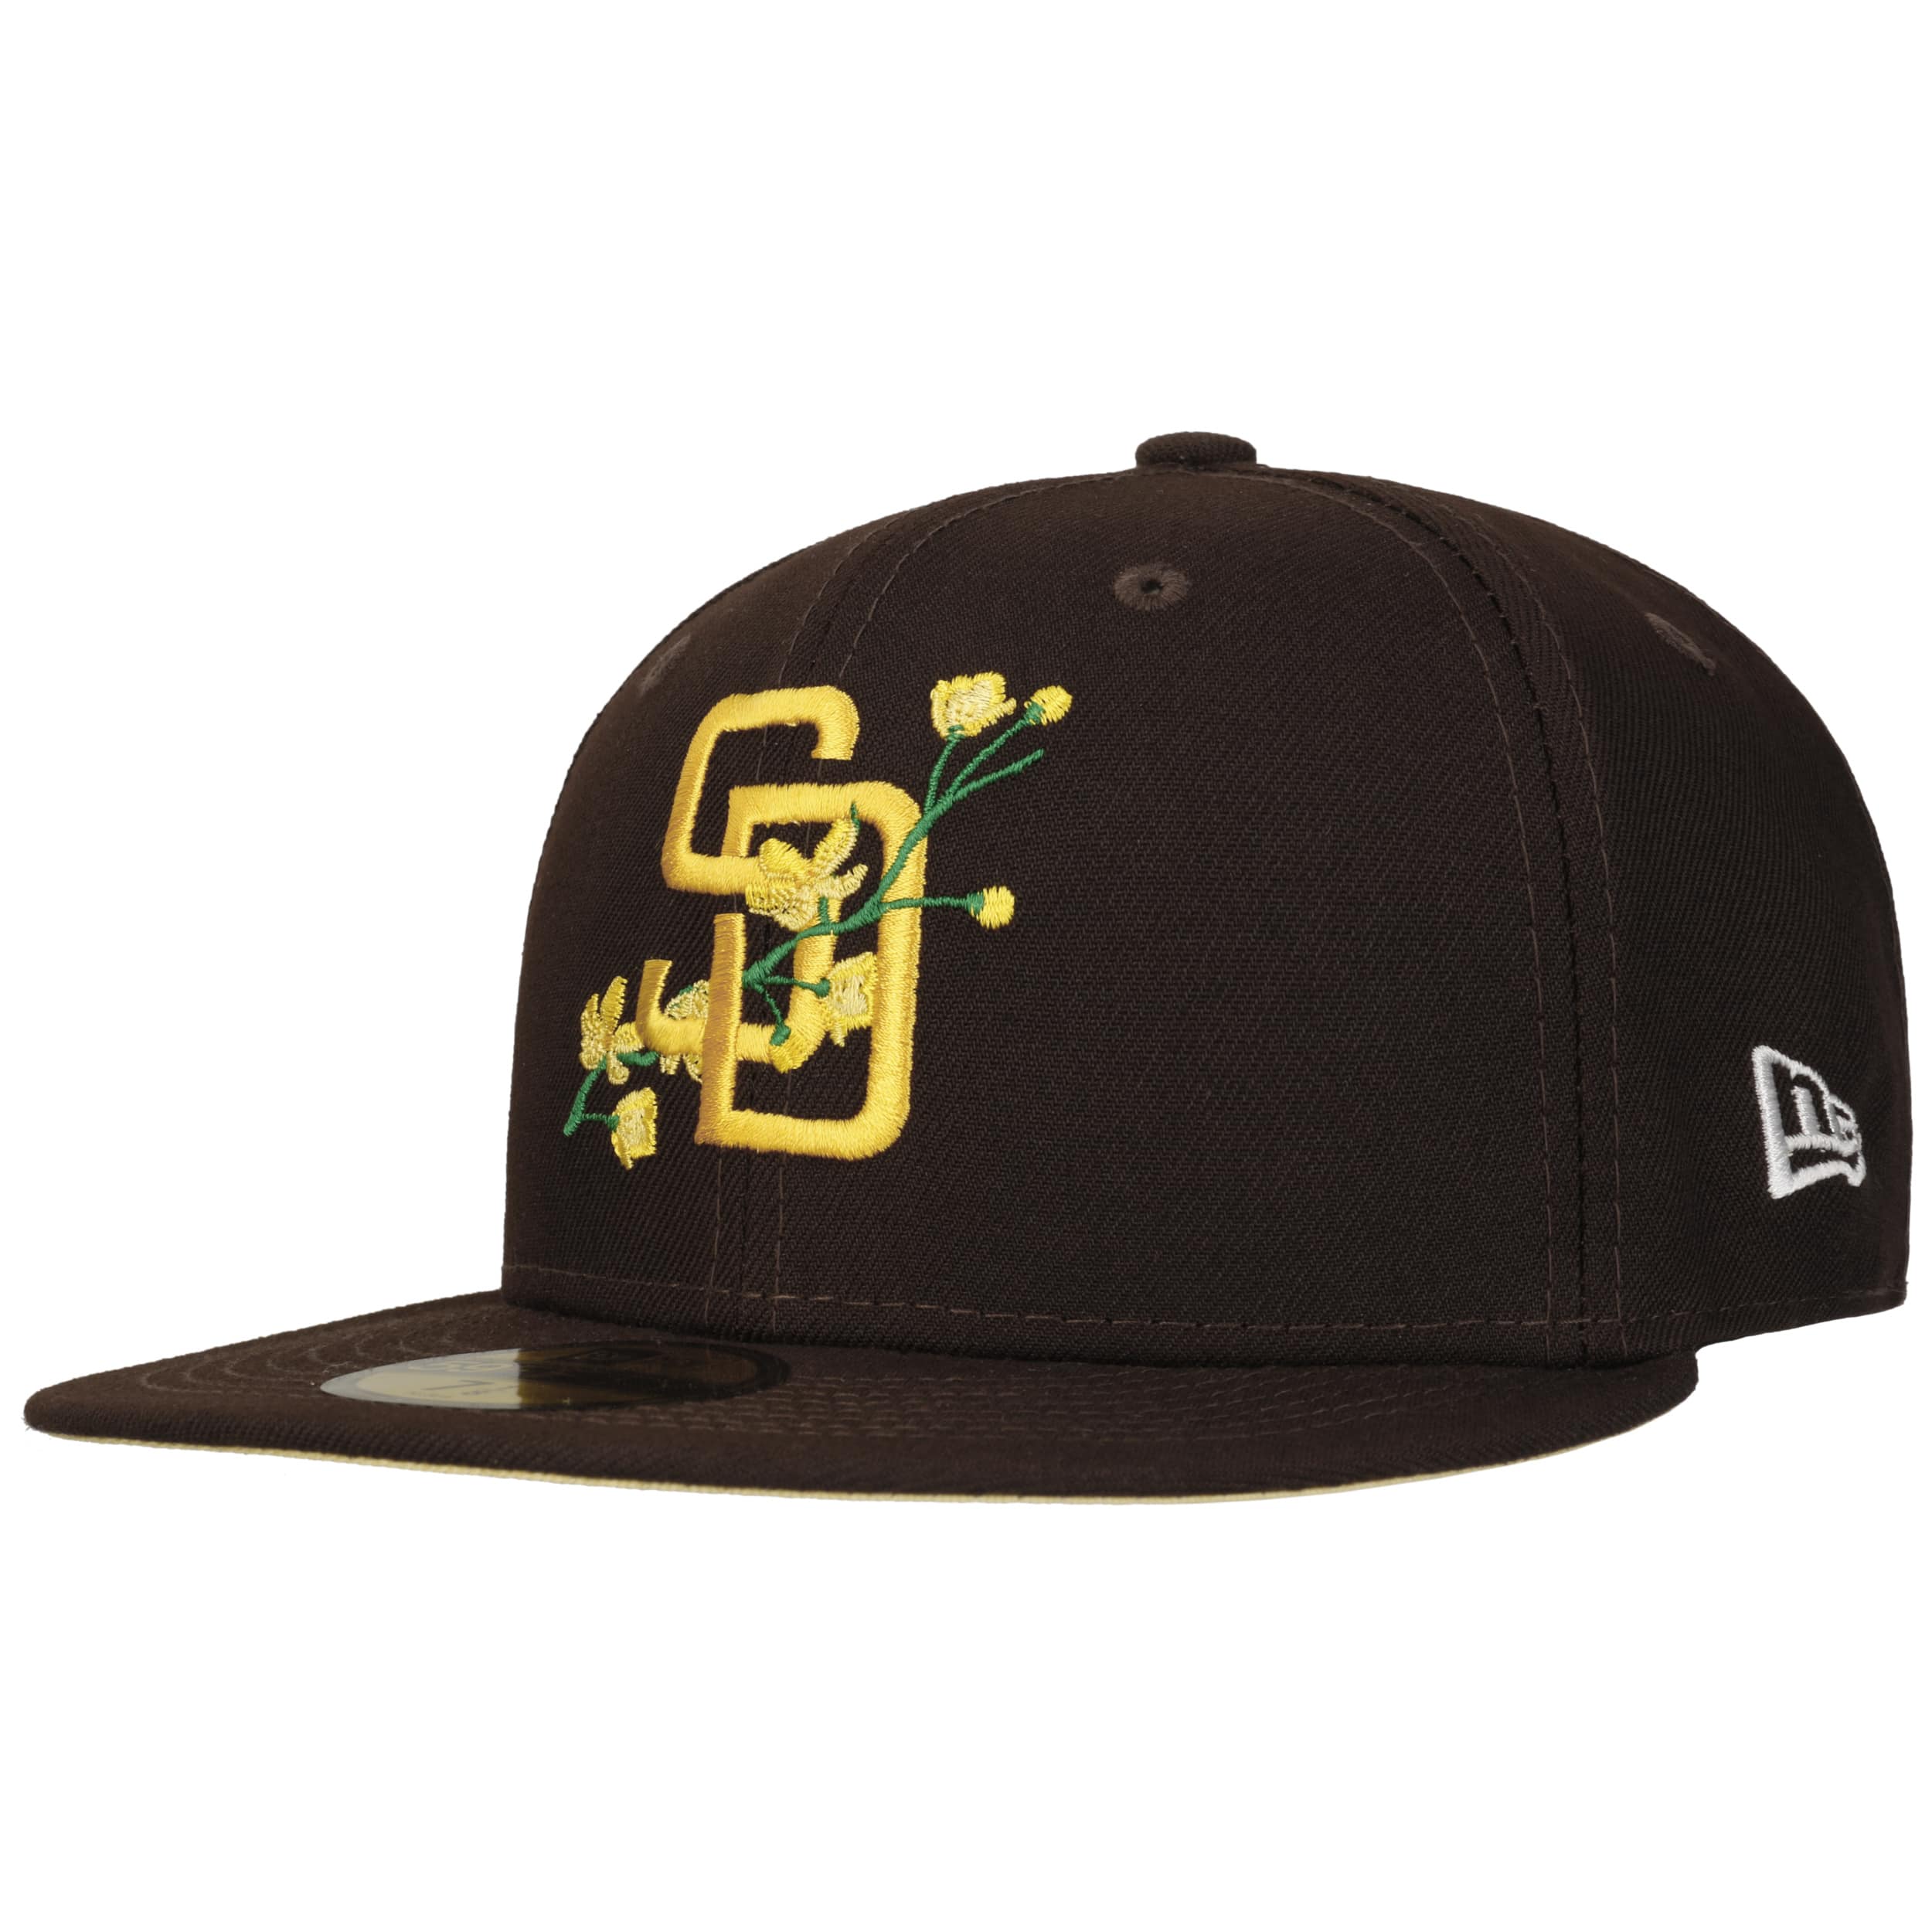 NEW ERA 59FIFTY MLB AUTHENTIC SAN DIEGO PADRES TEAM FITTED CAP